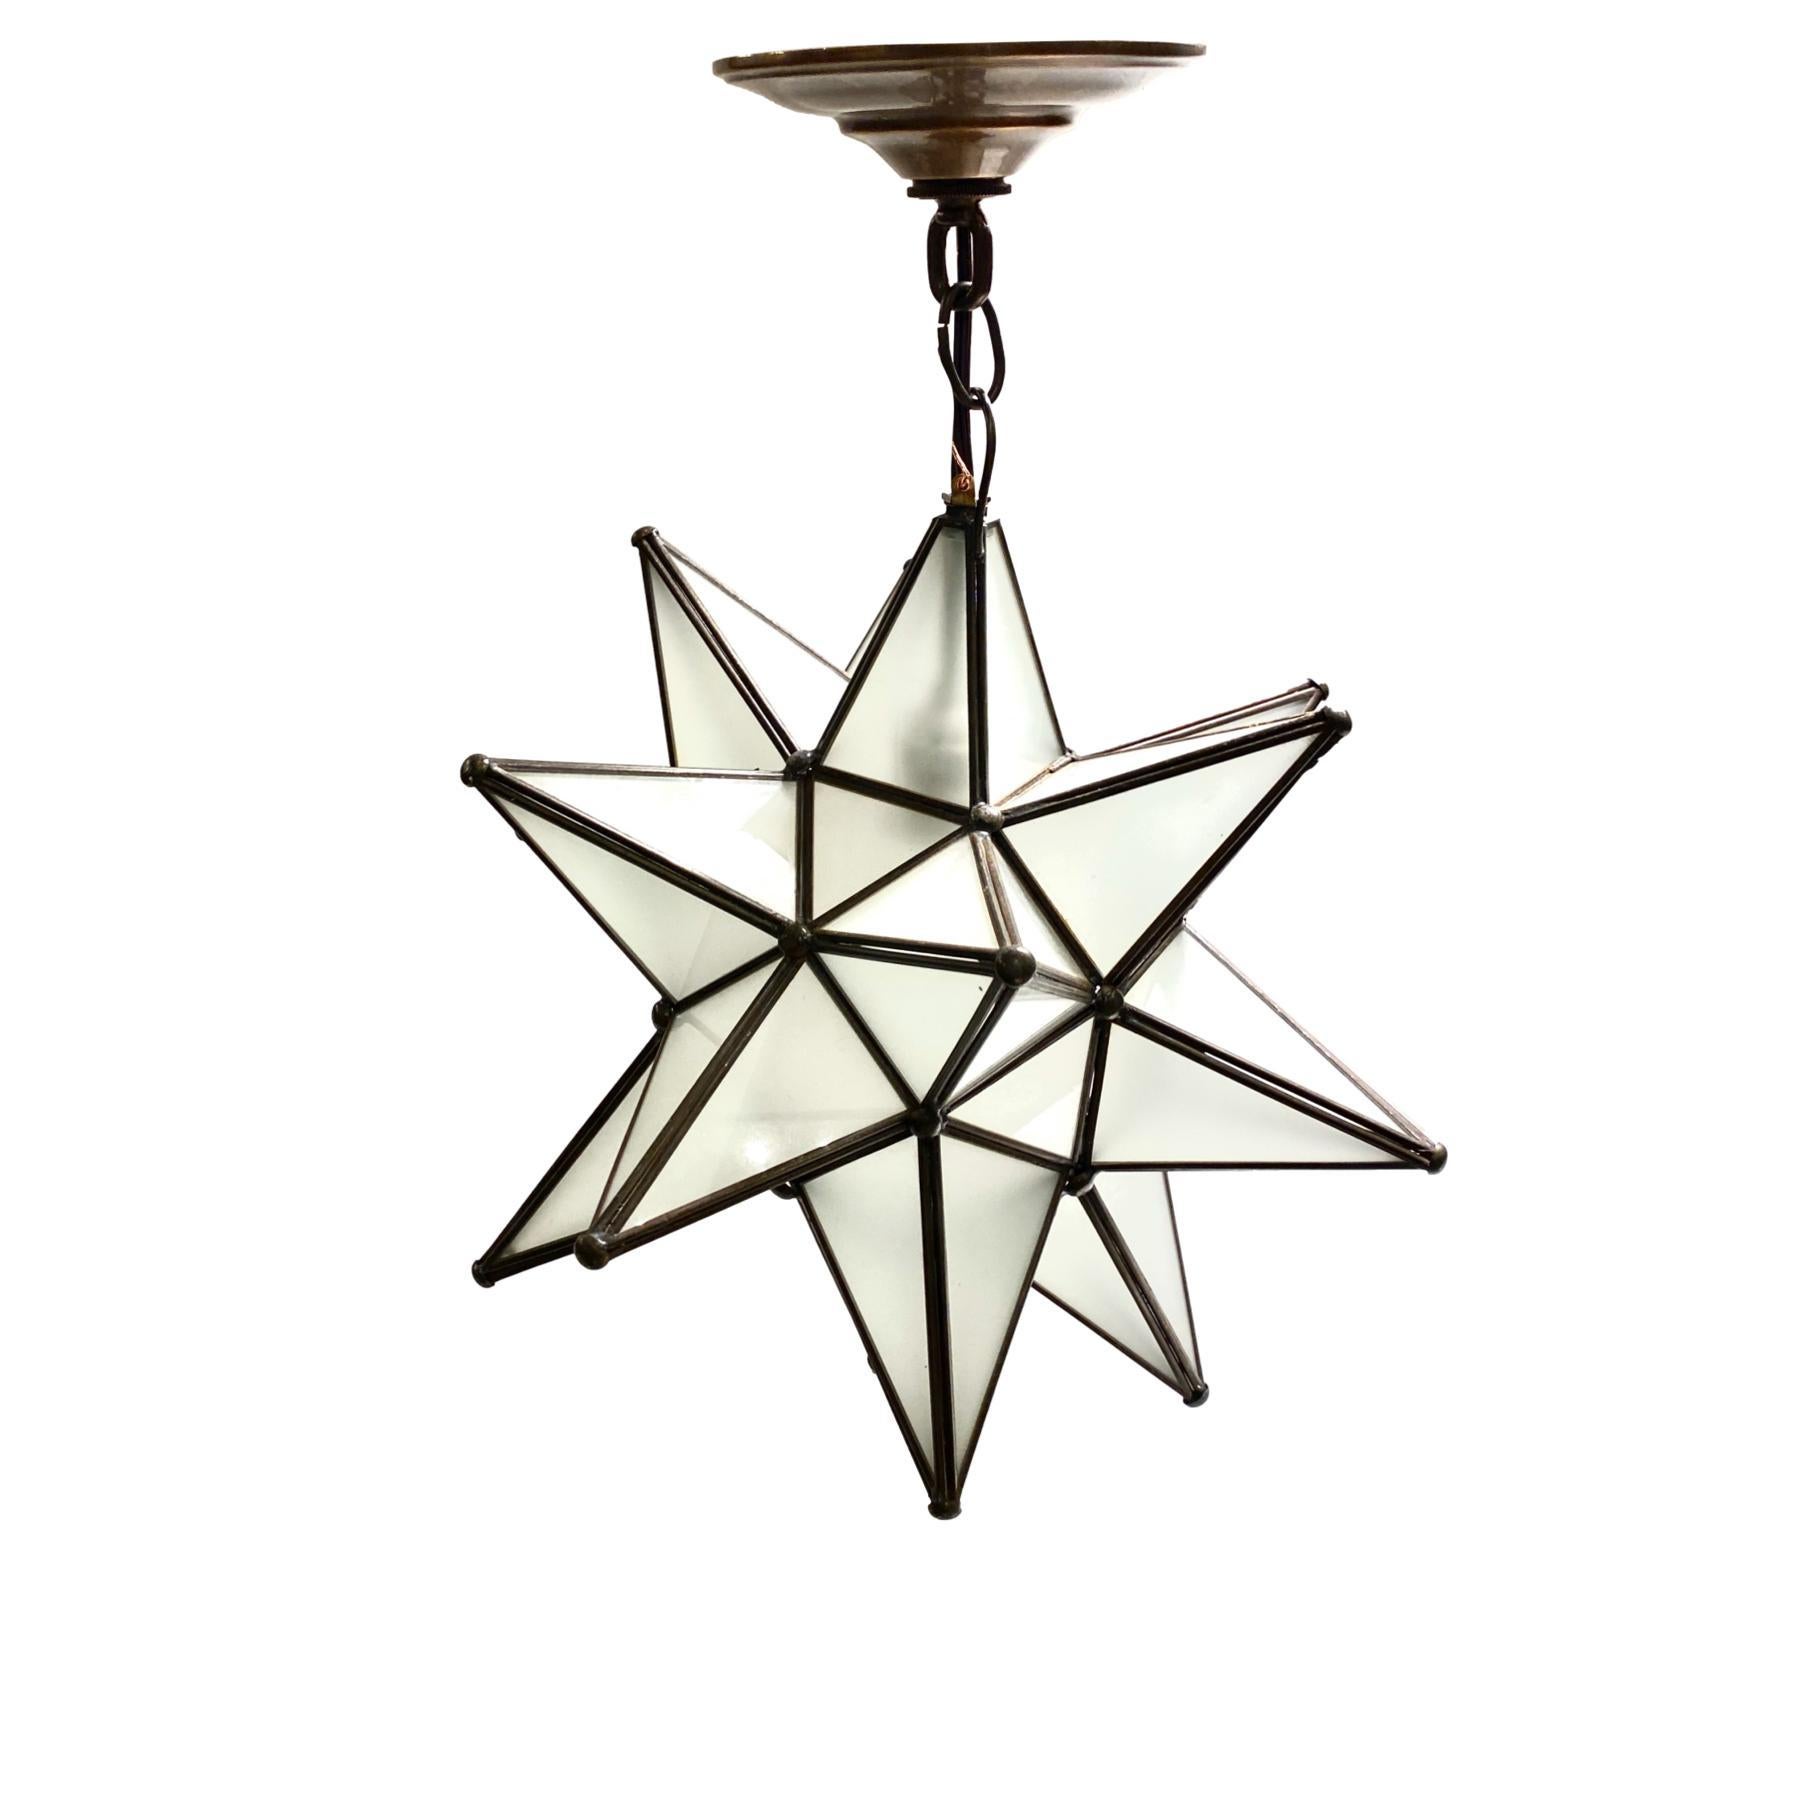 A pair of circa 1950's French star-shaped light fixture with interior light. Sold individually.

Measurements:
Drop: 19